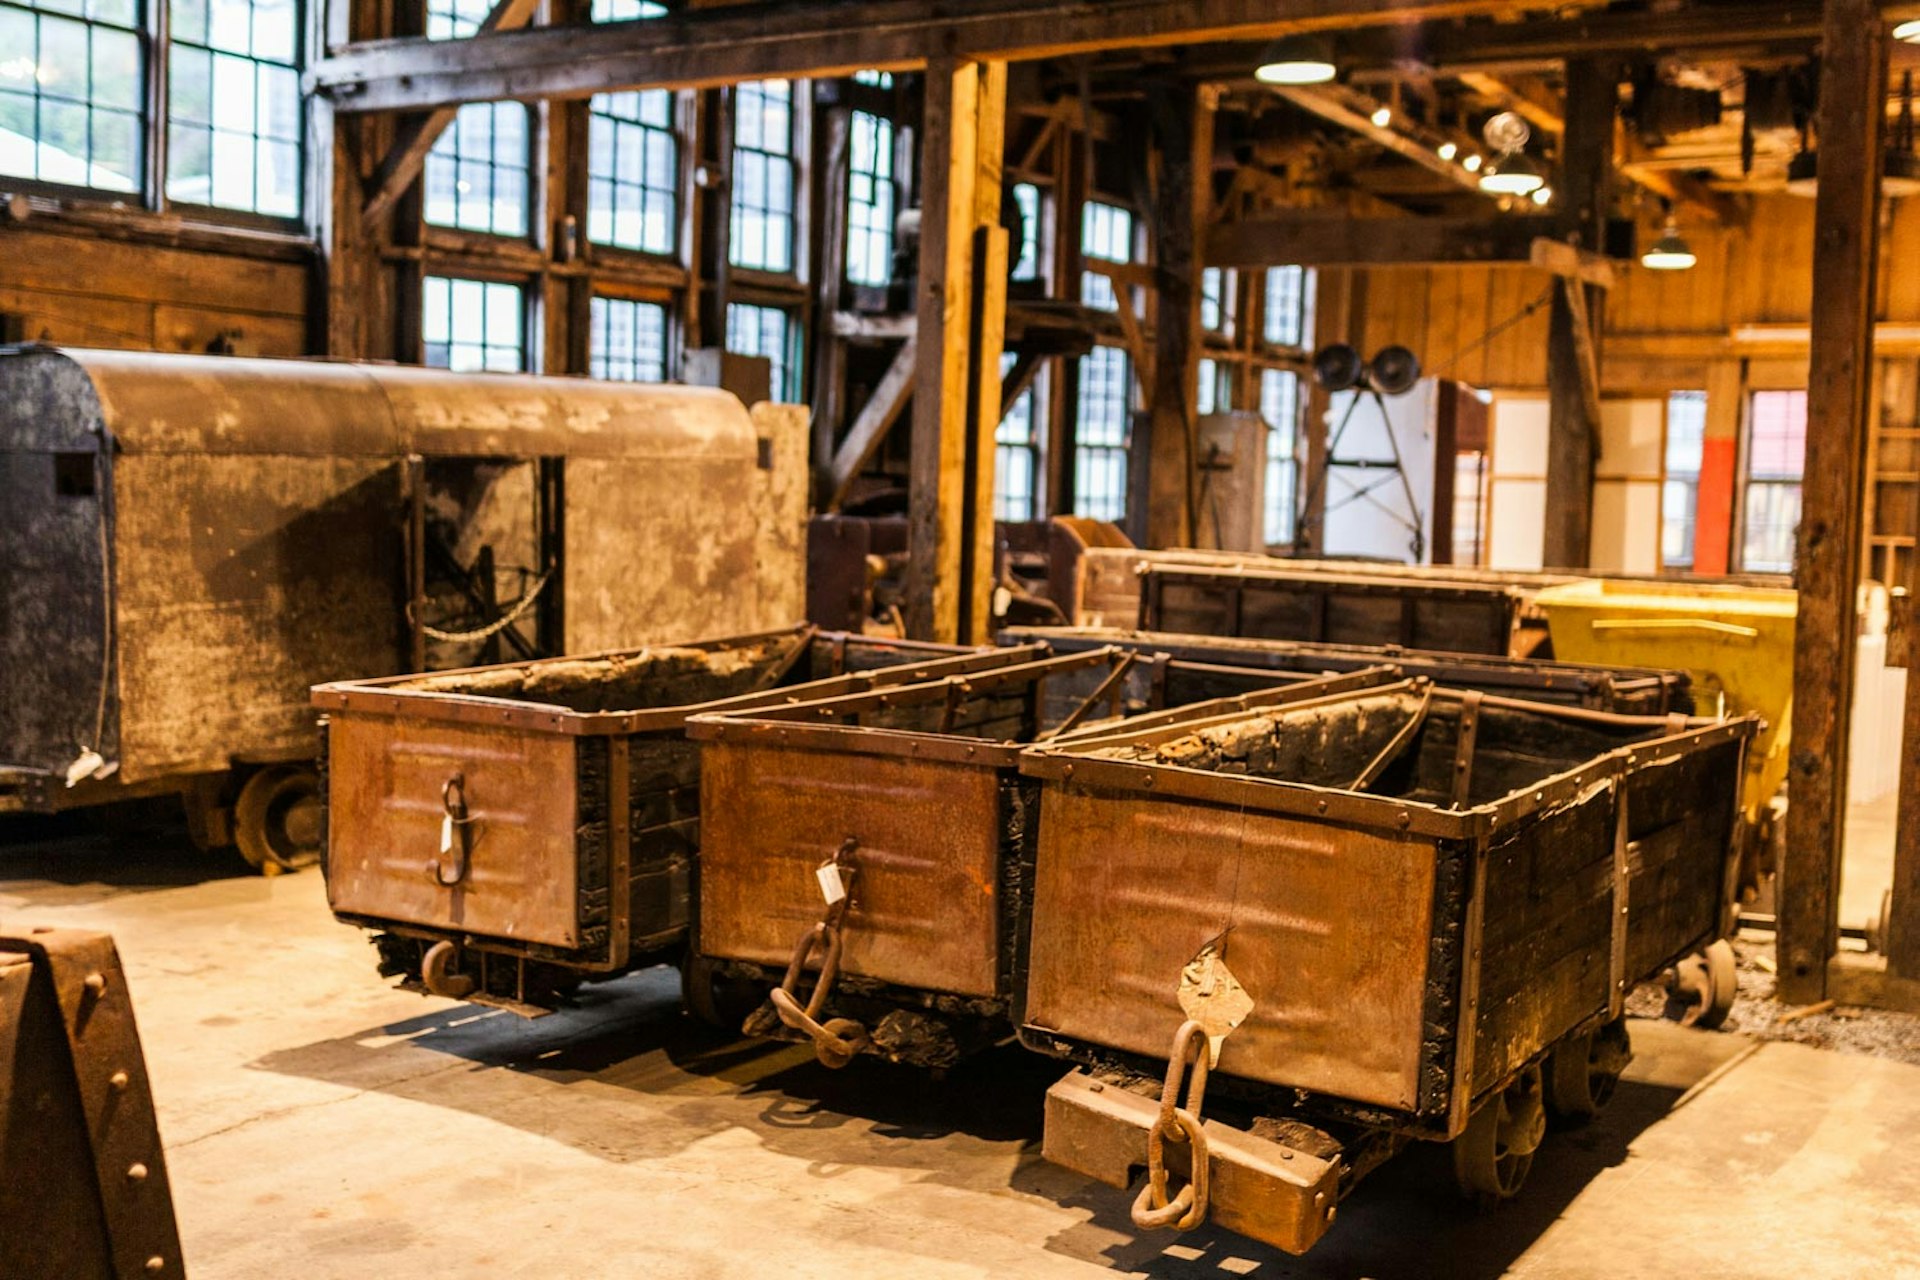 Mine carts at the Britannia Mine Museum © Alexander Howard / Lonely Planet